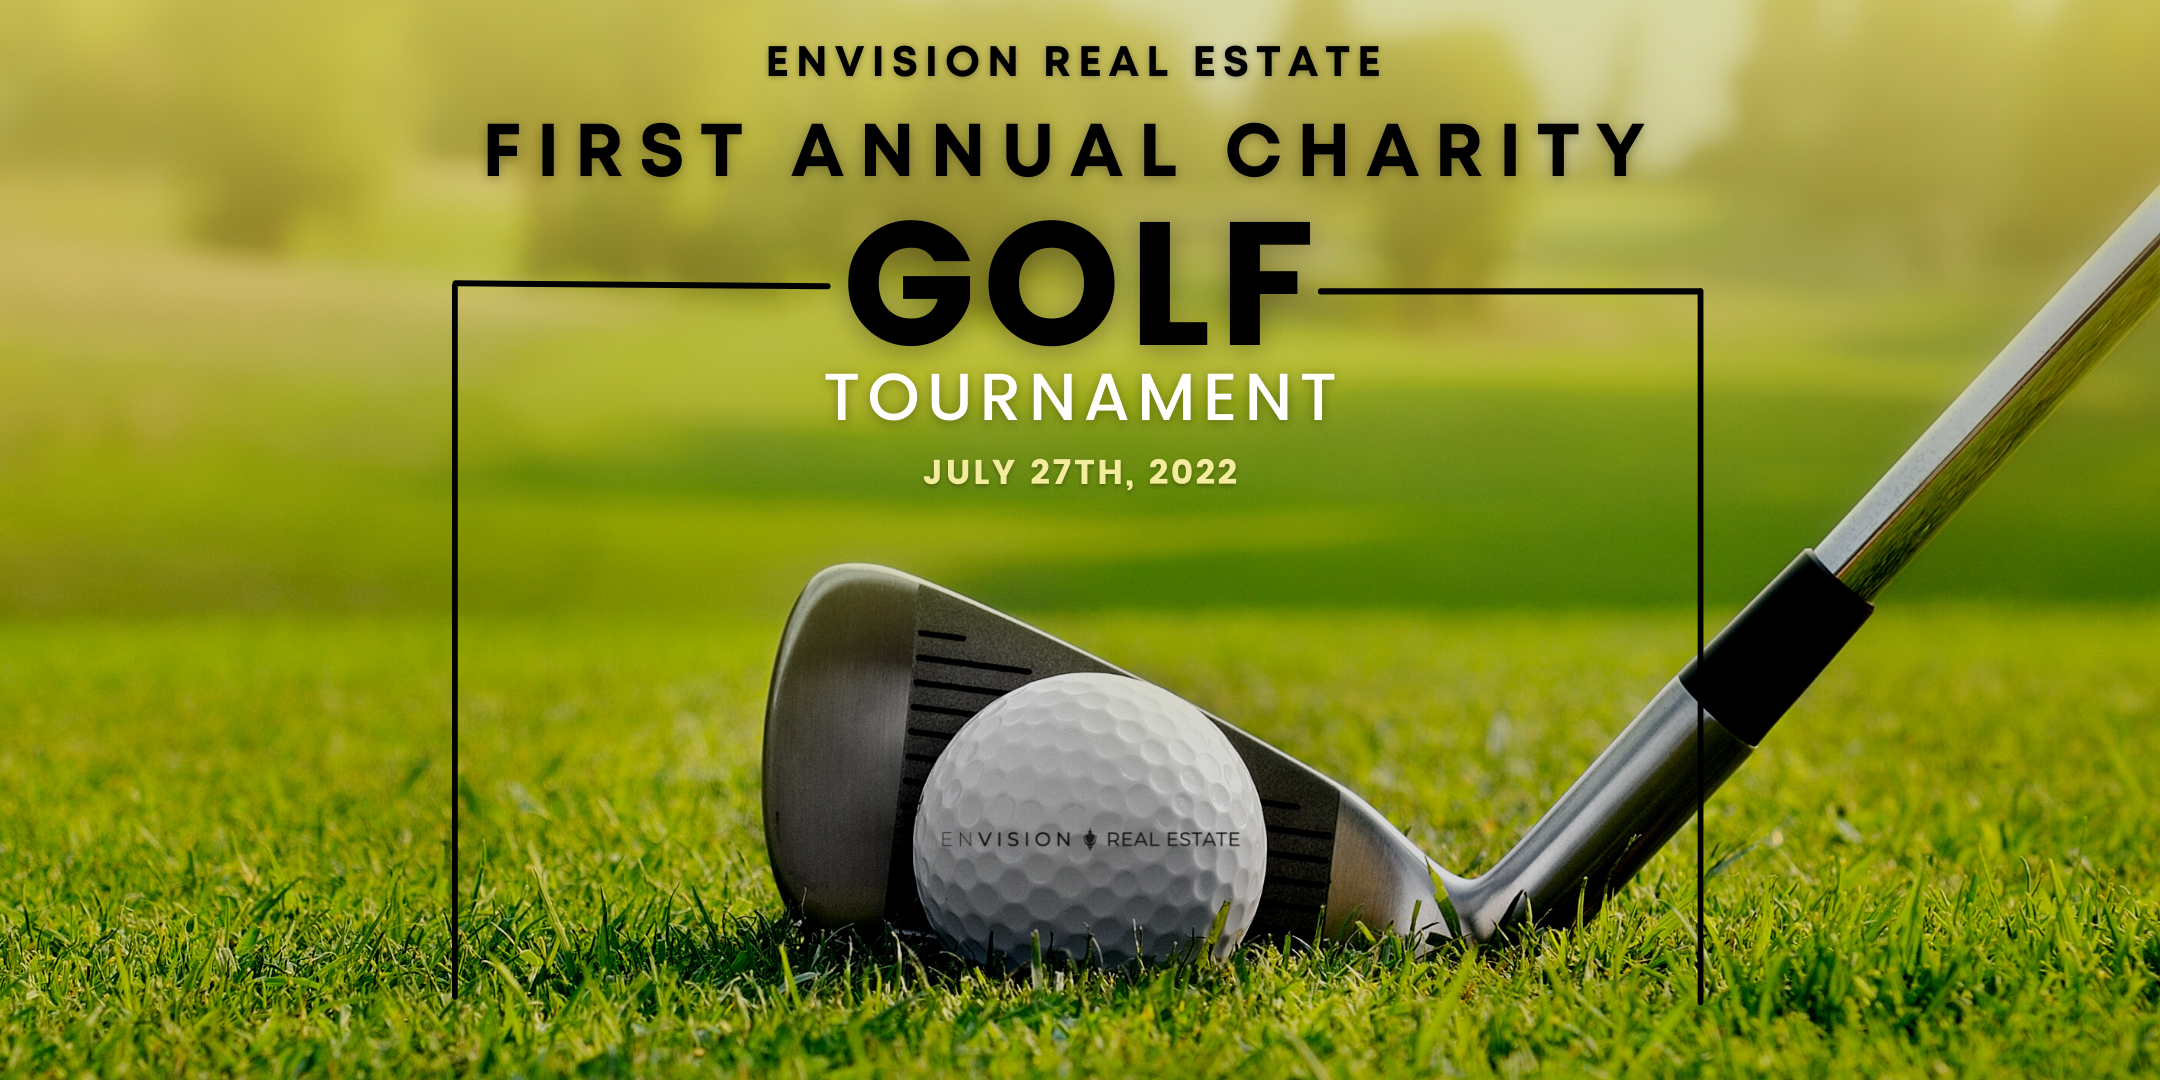 Envision Real Estate First Annual Charity Golf Tournament